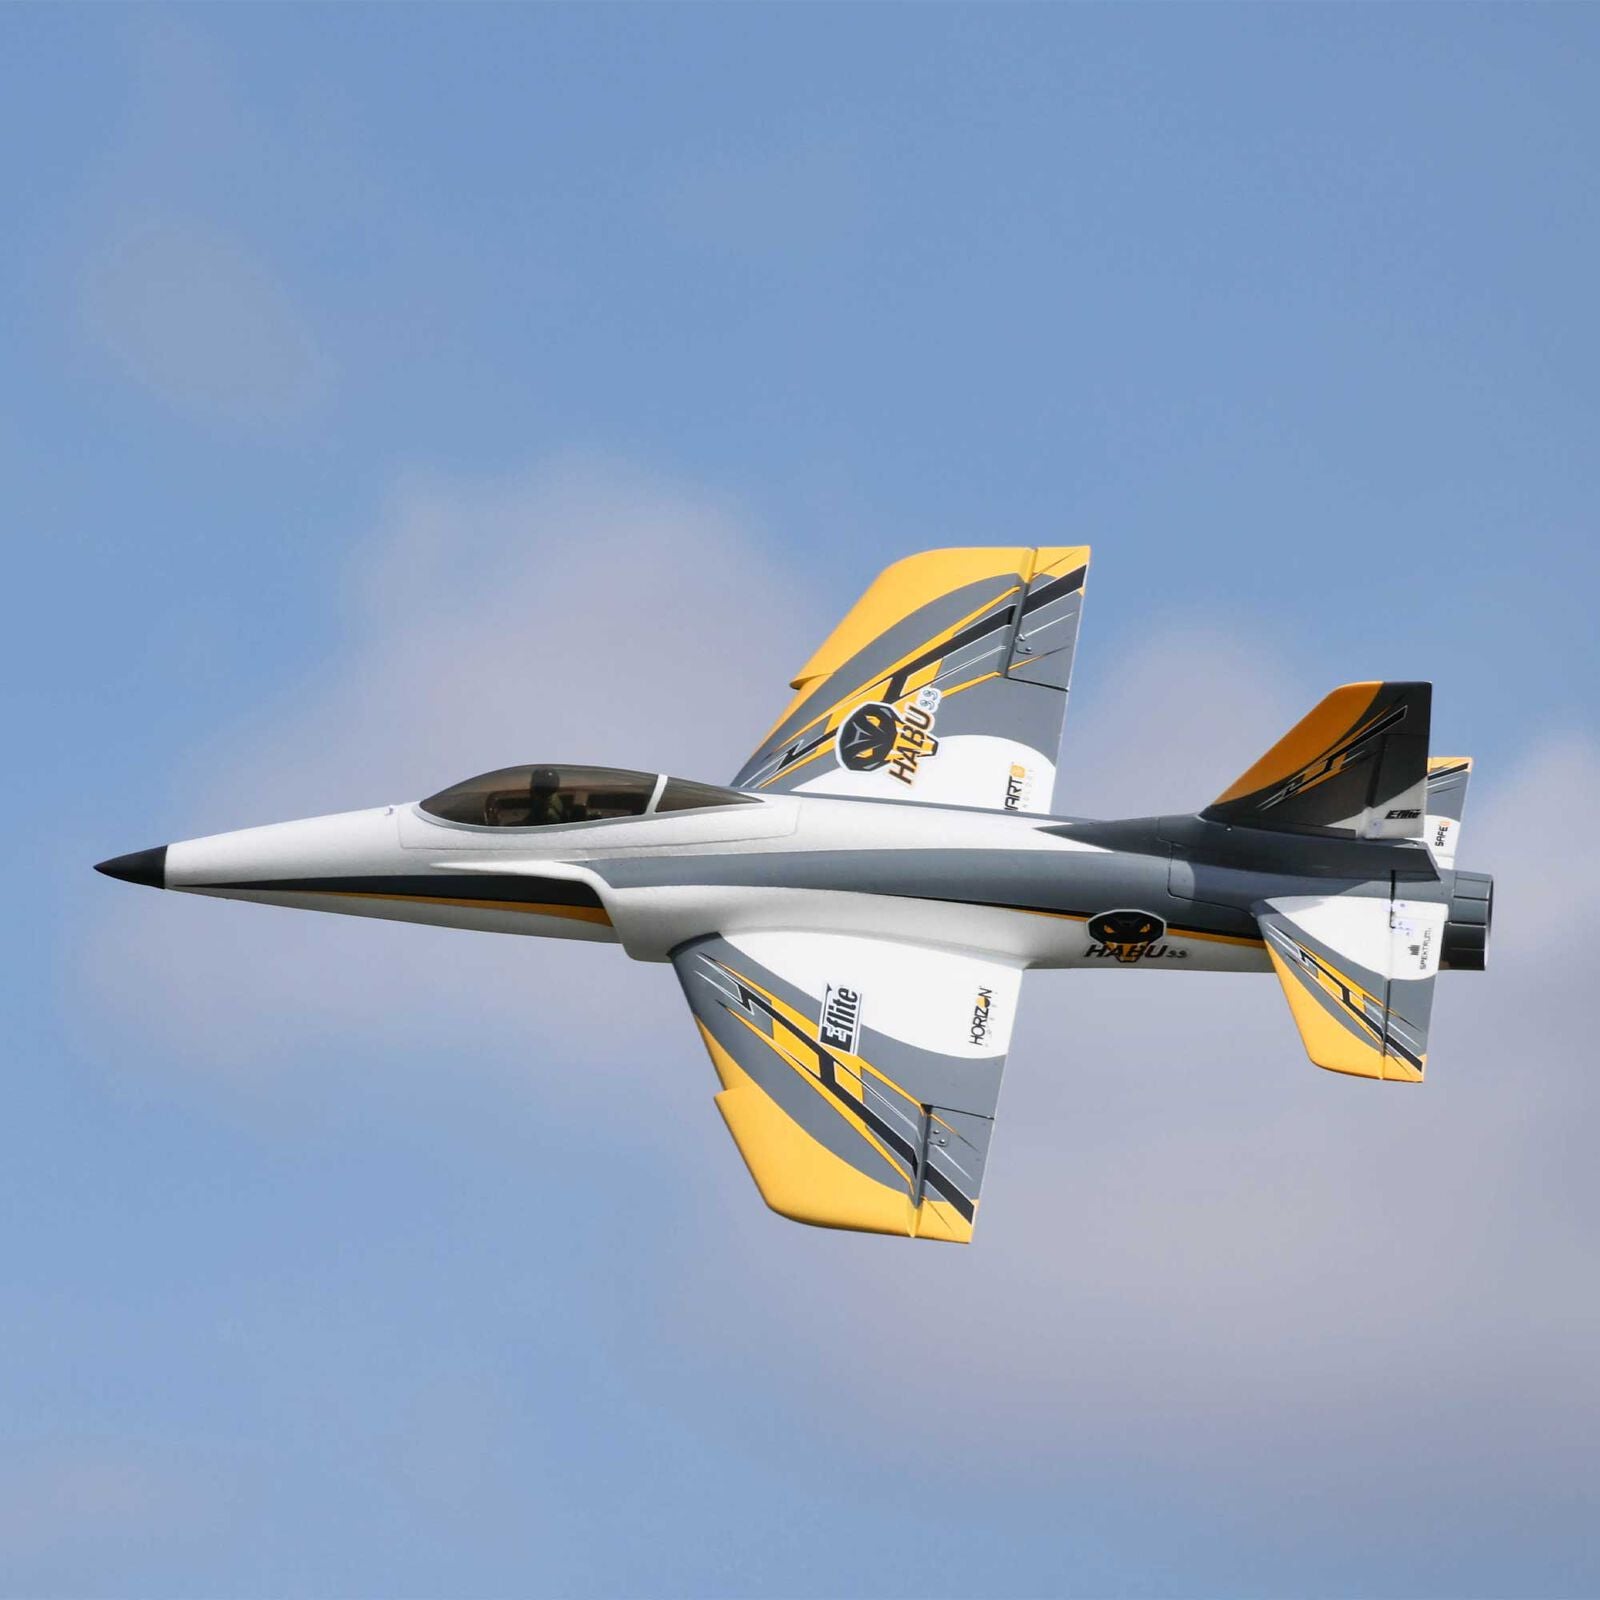 E-flite Habu SS (Super Sport) 70mm EDF Jet BNF Basic with SAFE Select and AS3X - EFL0950